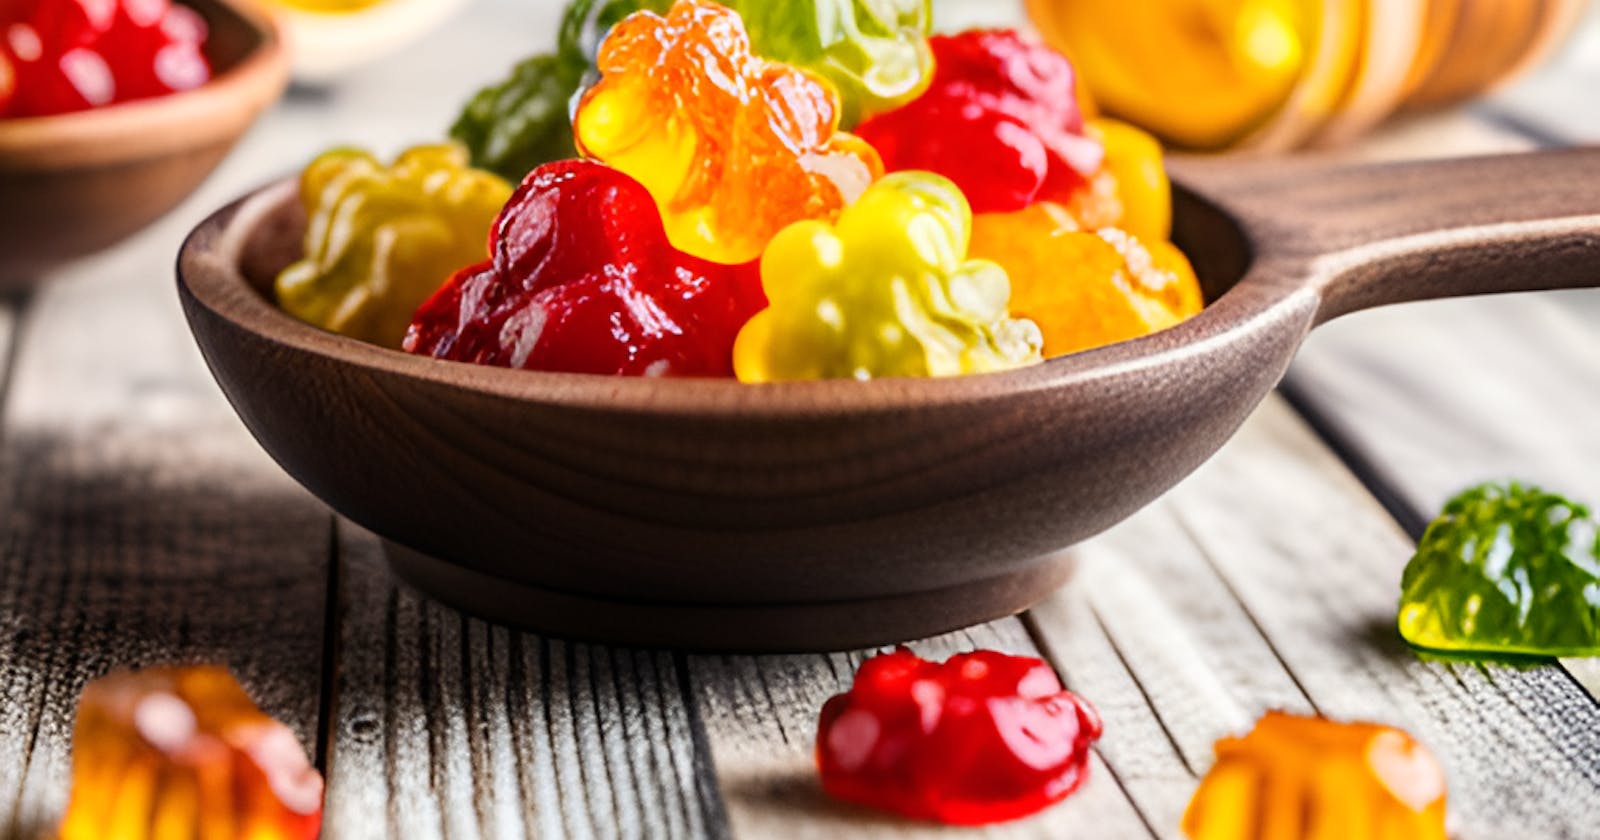 “Revitalize Your Life with Reveal CBD Gummies: Here’s What You Need to Know!”